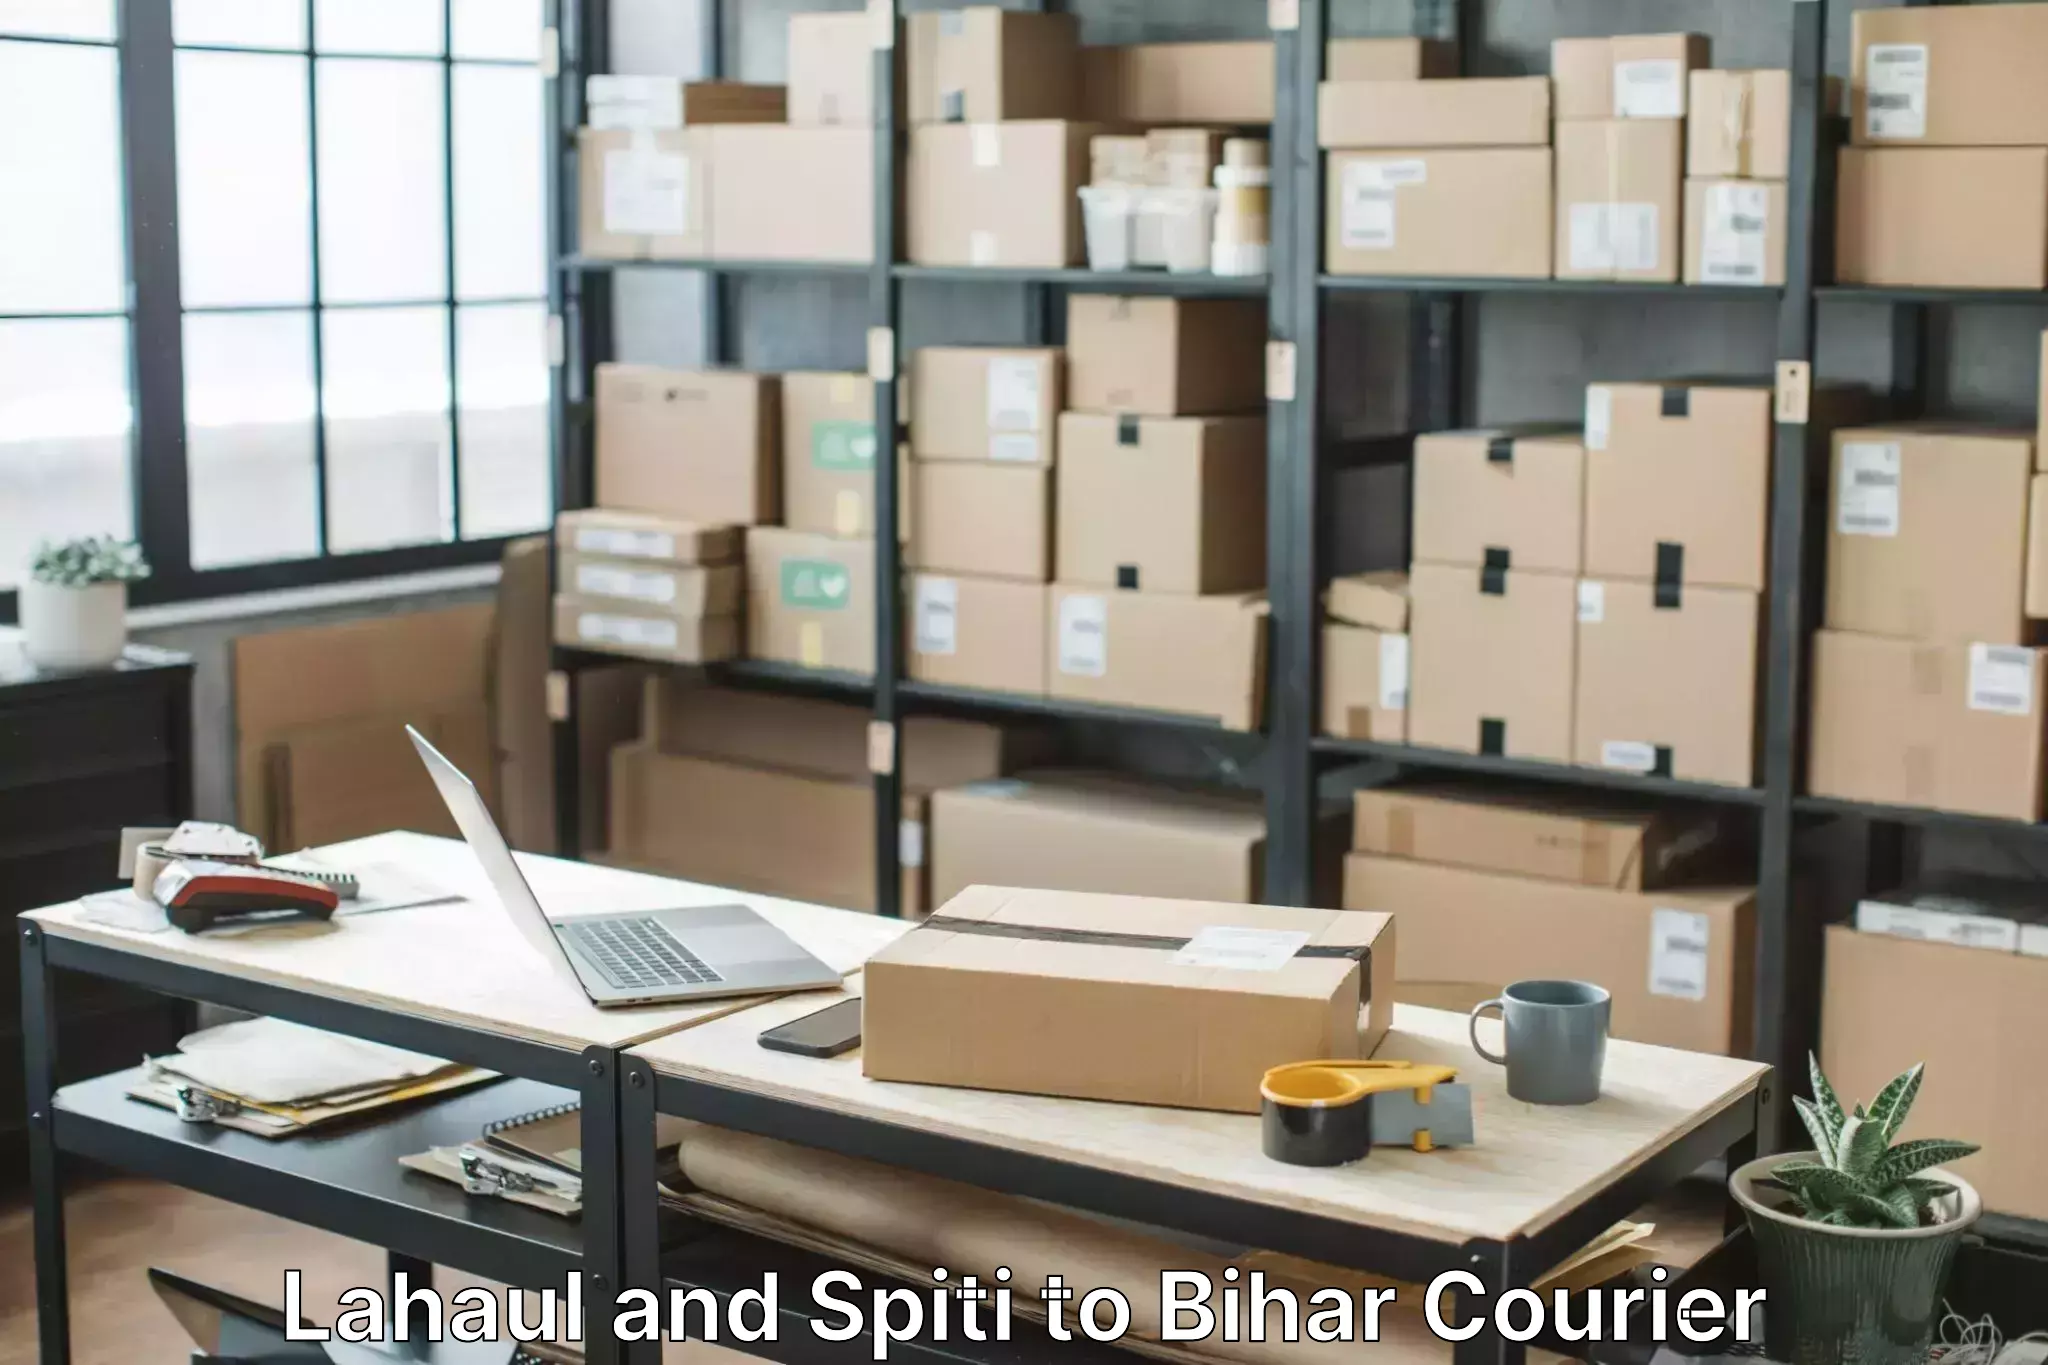 Household goods transport service Lahaul and Spiti to Bihar